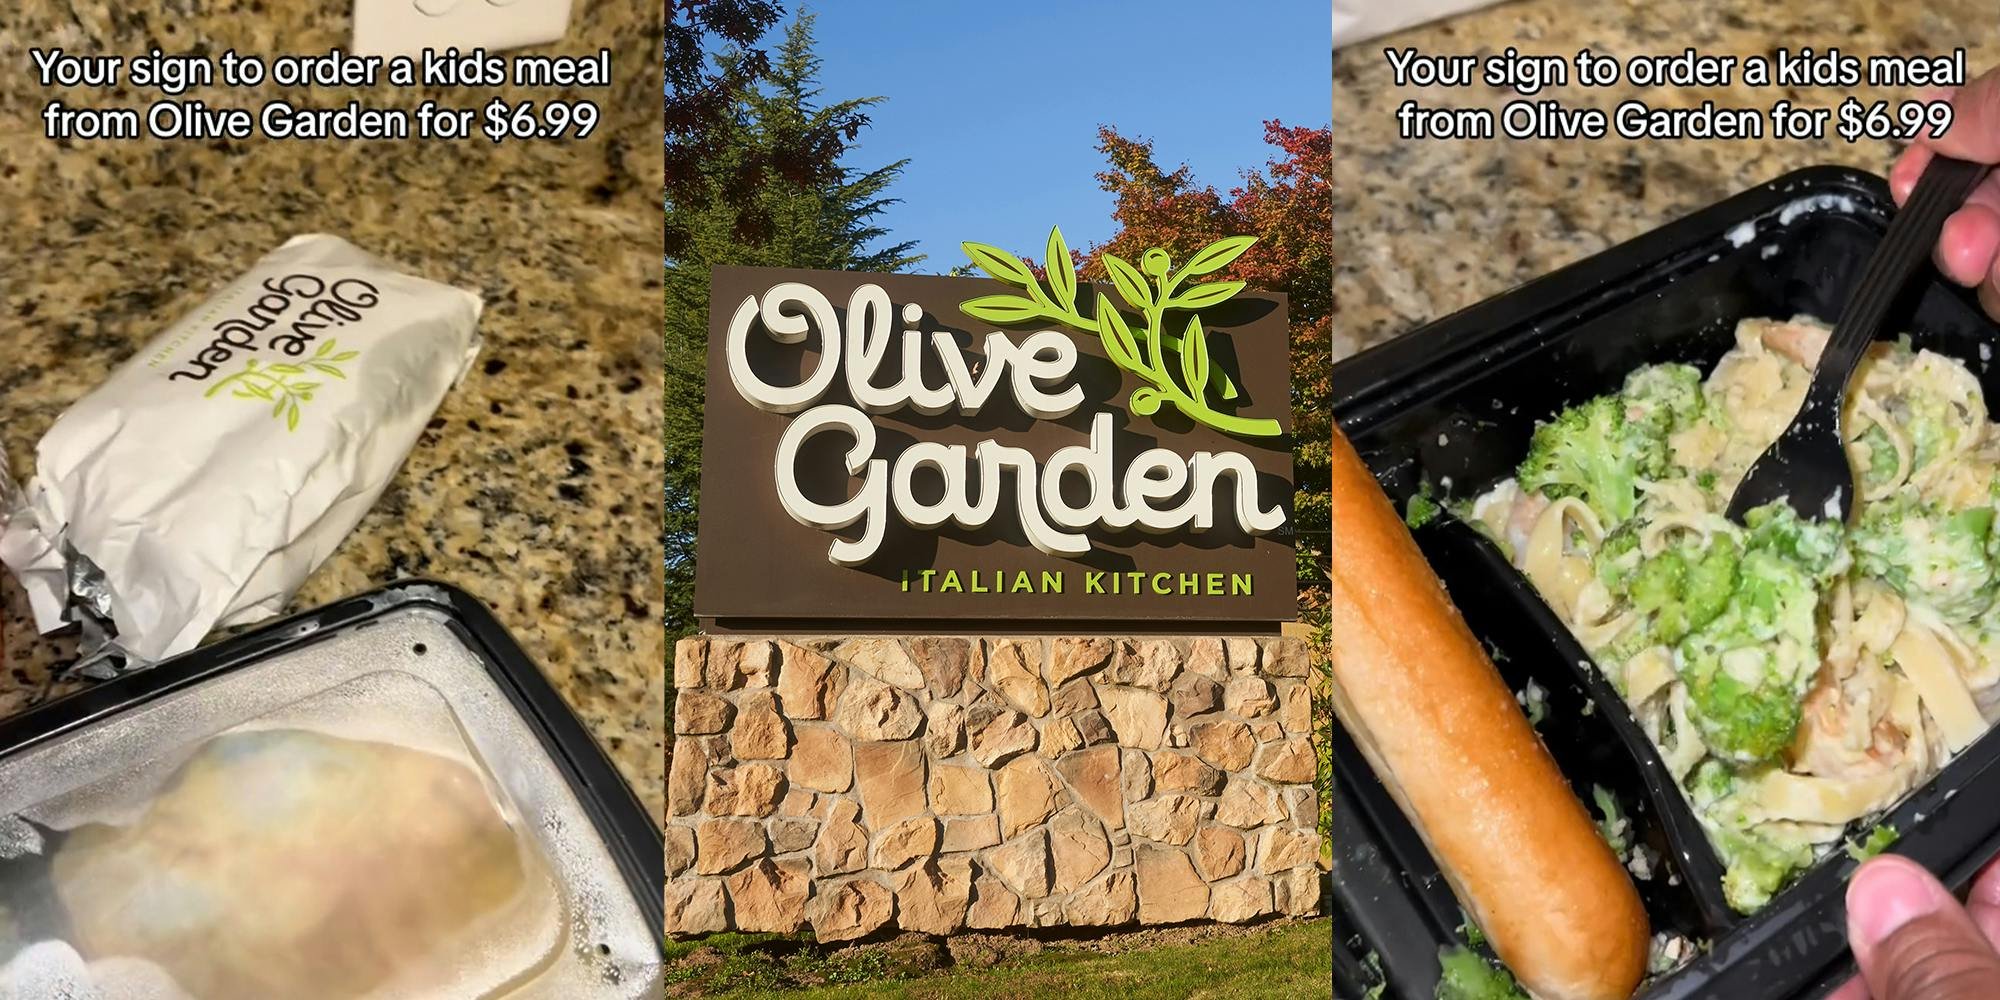 'I'd still be hungry': Viewers divided over Olive Garden $7 meal hack